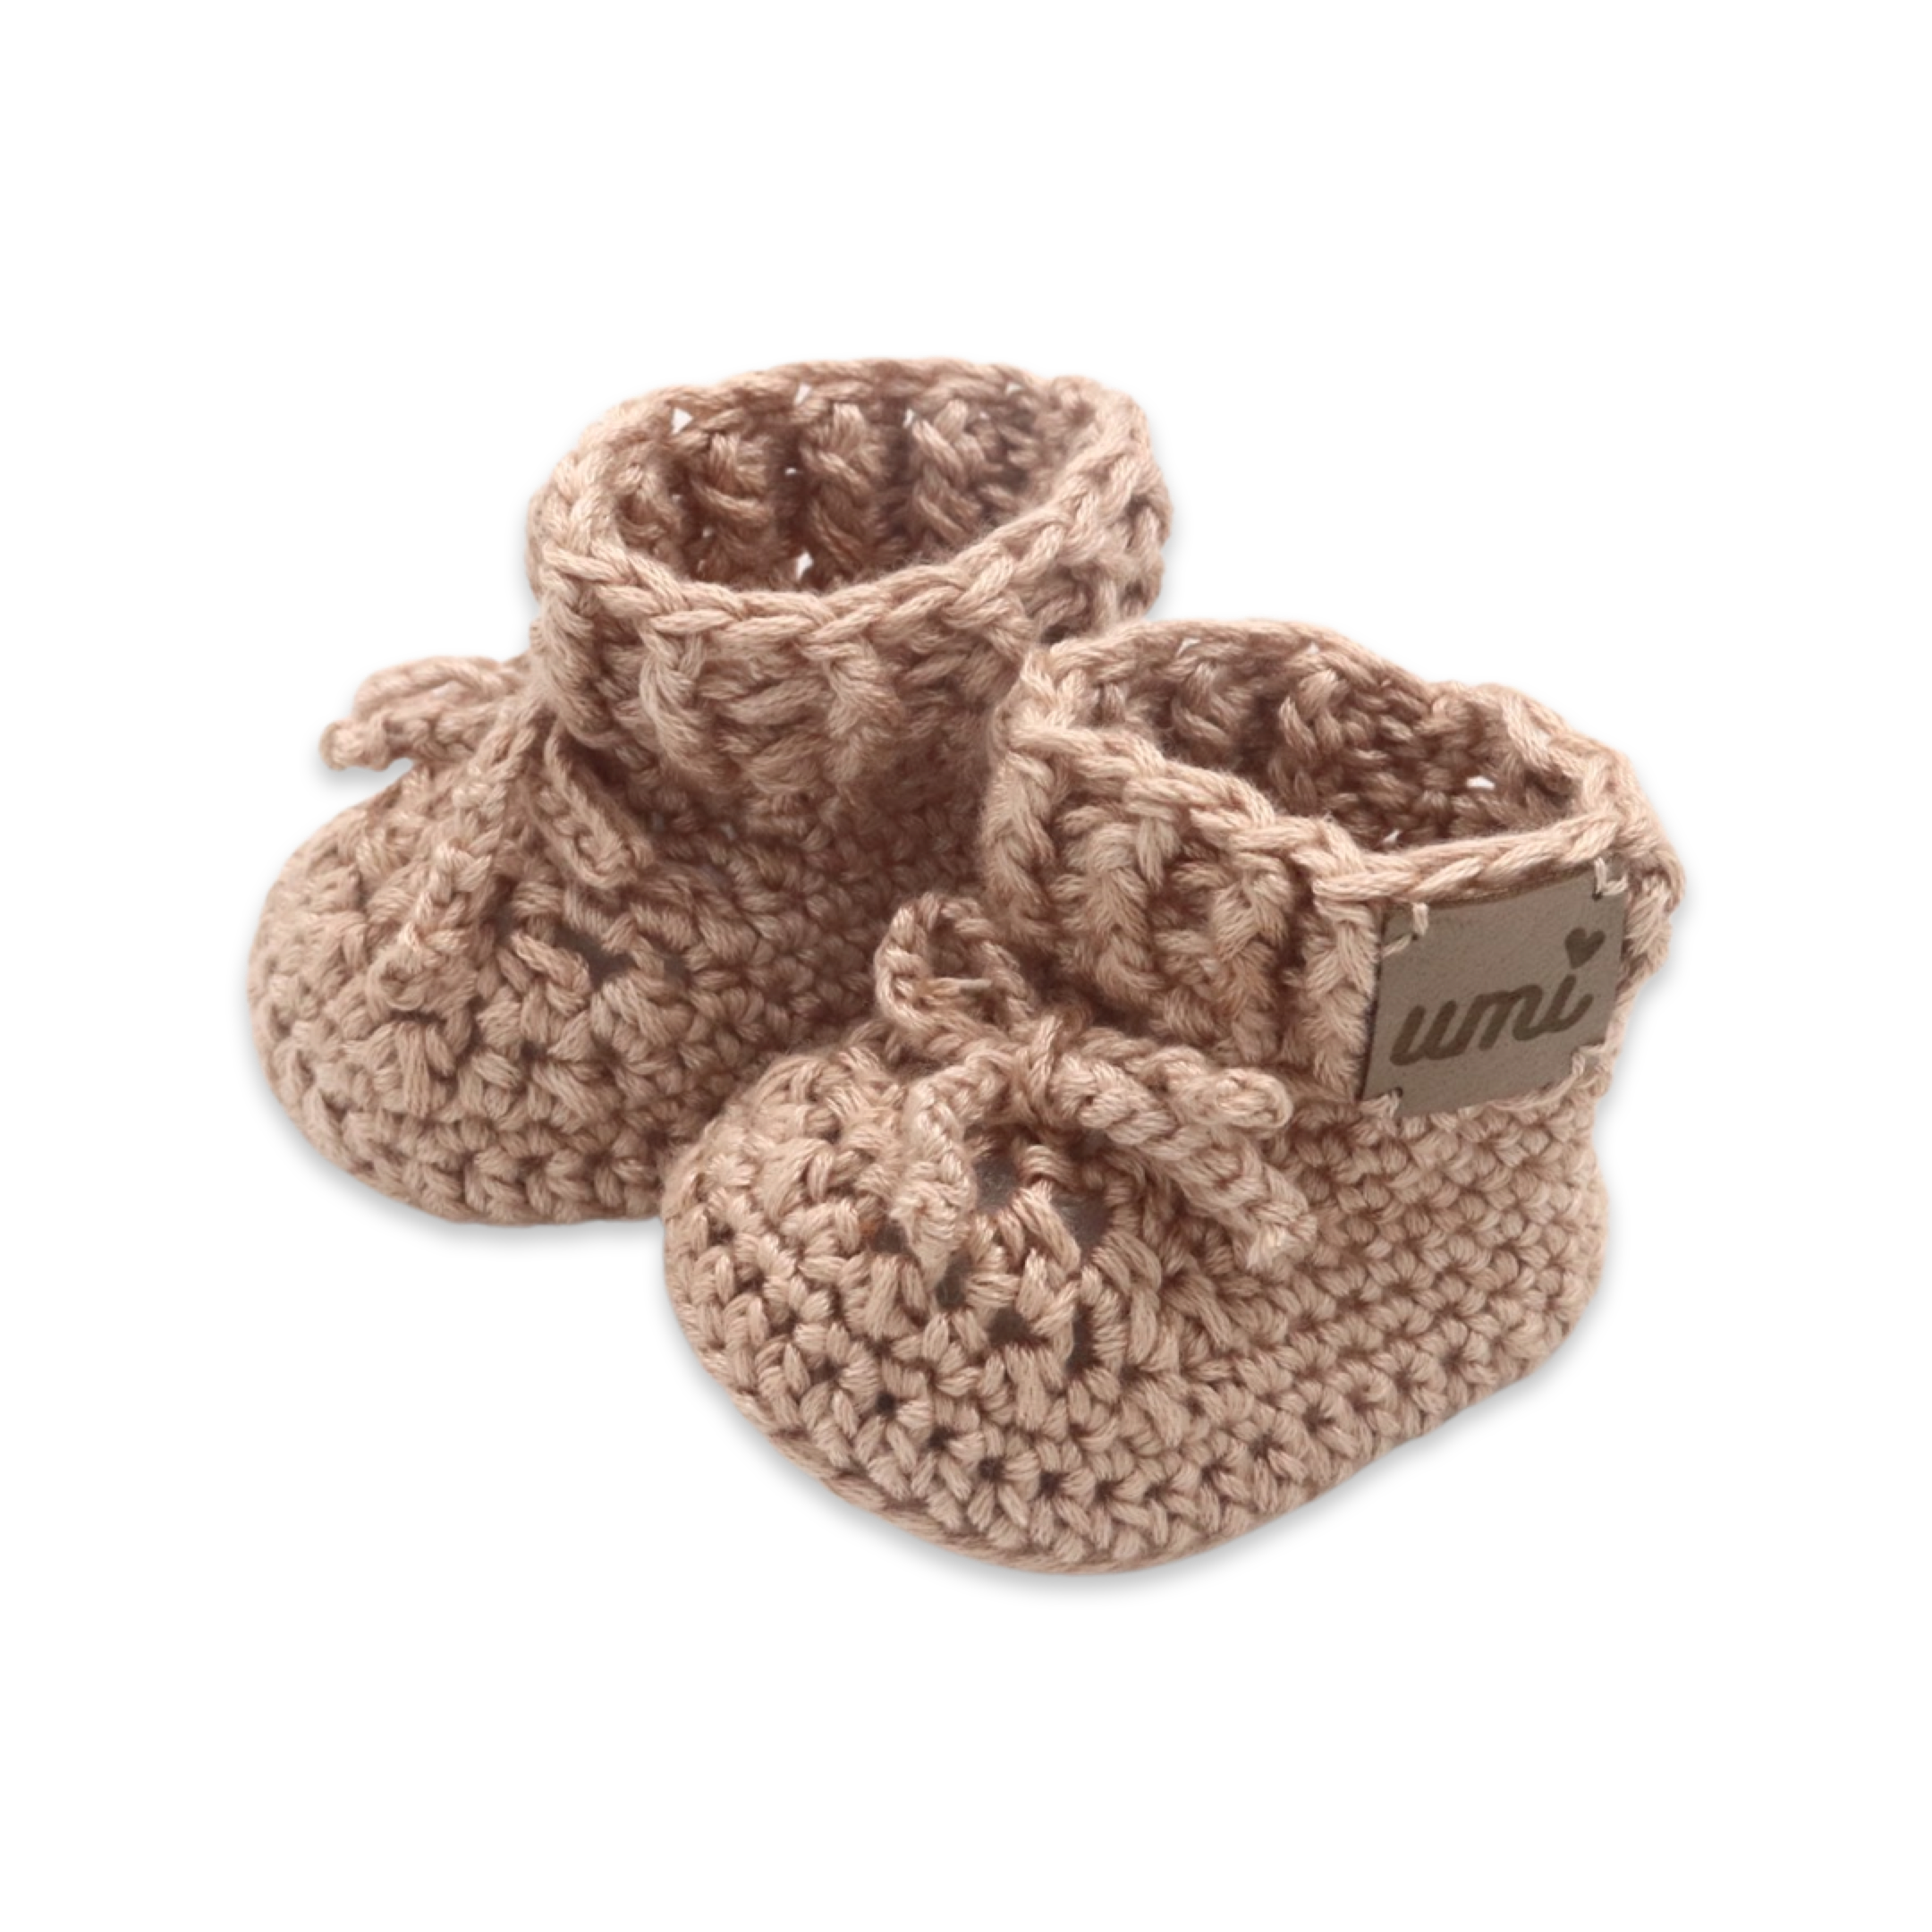 Umi Knitted Booties (0-3 Months) - Bubbadue